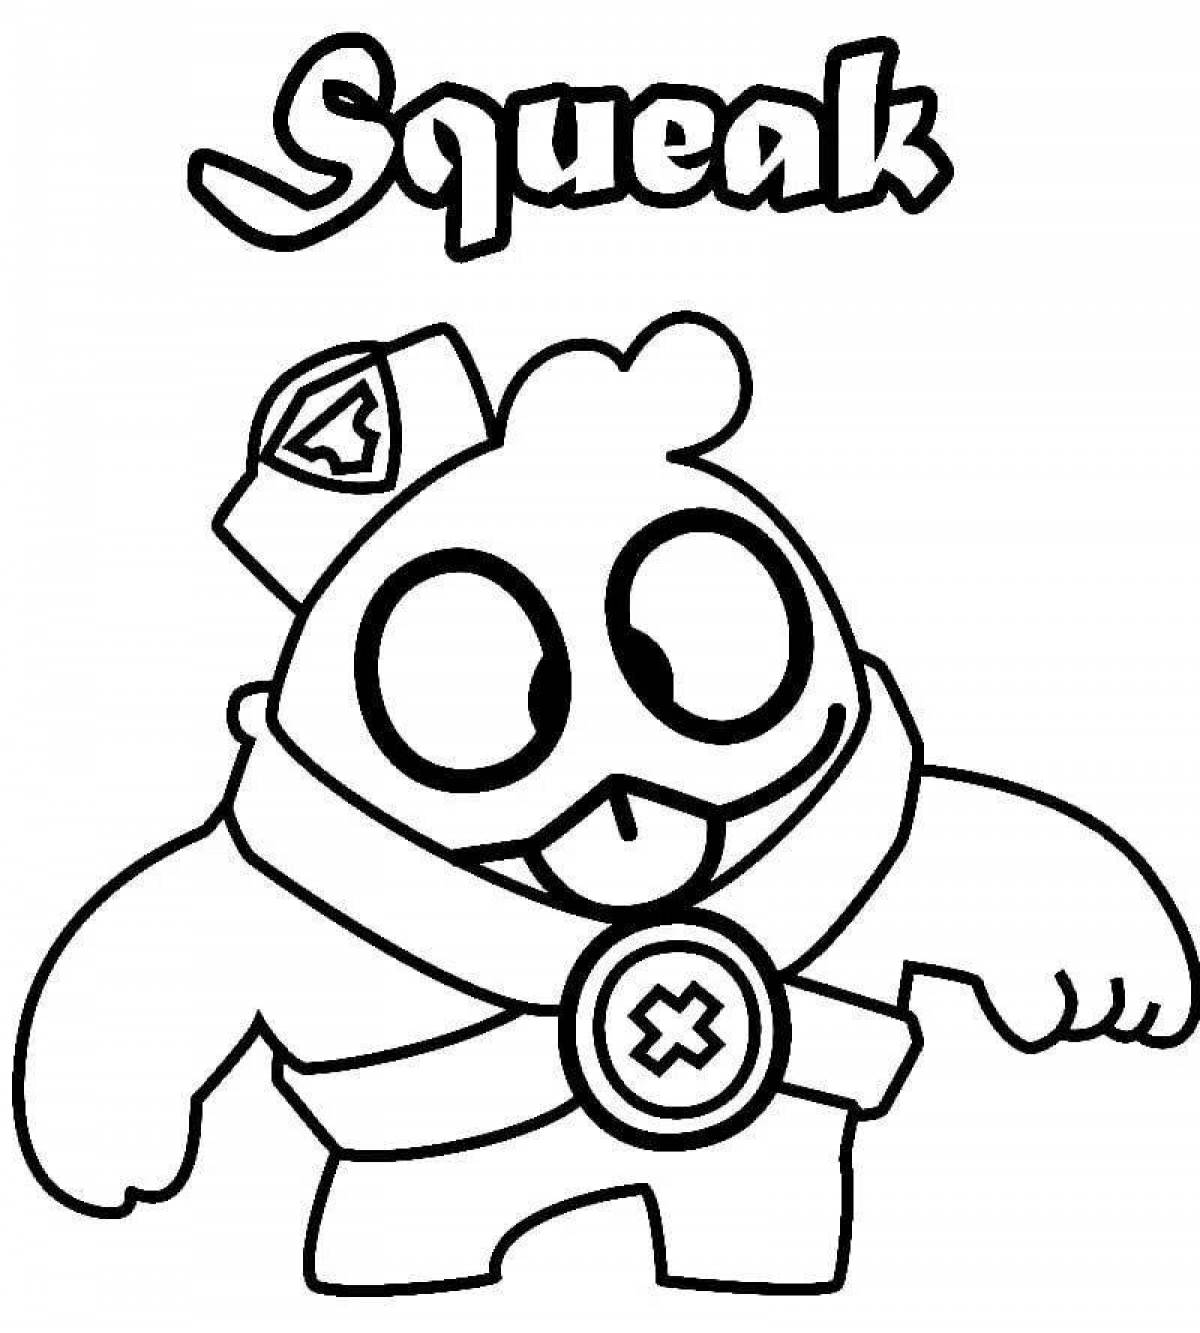 Squiek's awesome coloring book from brawl stars